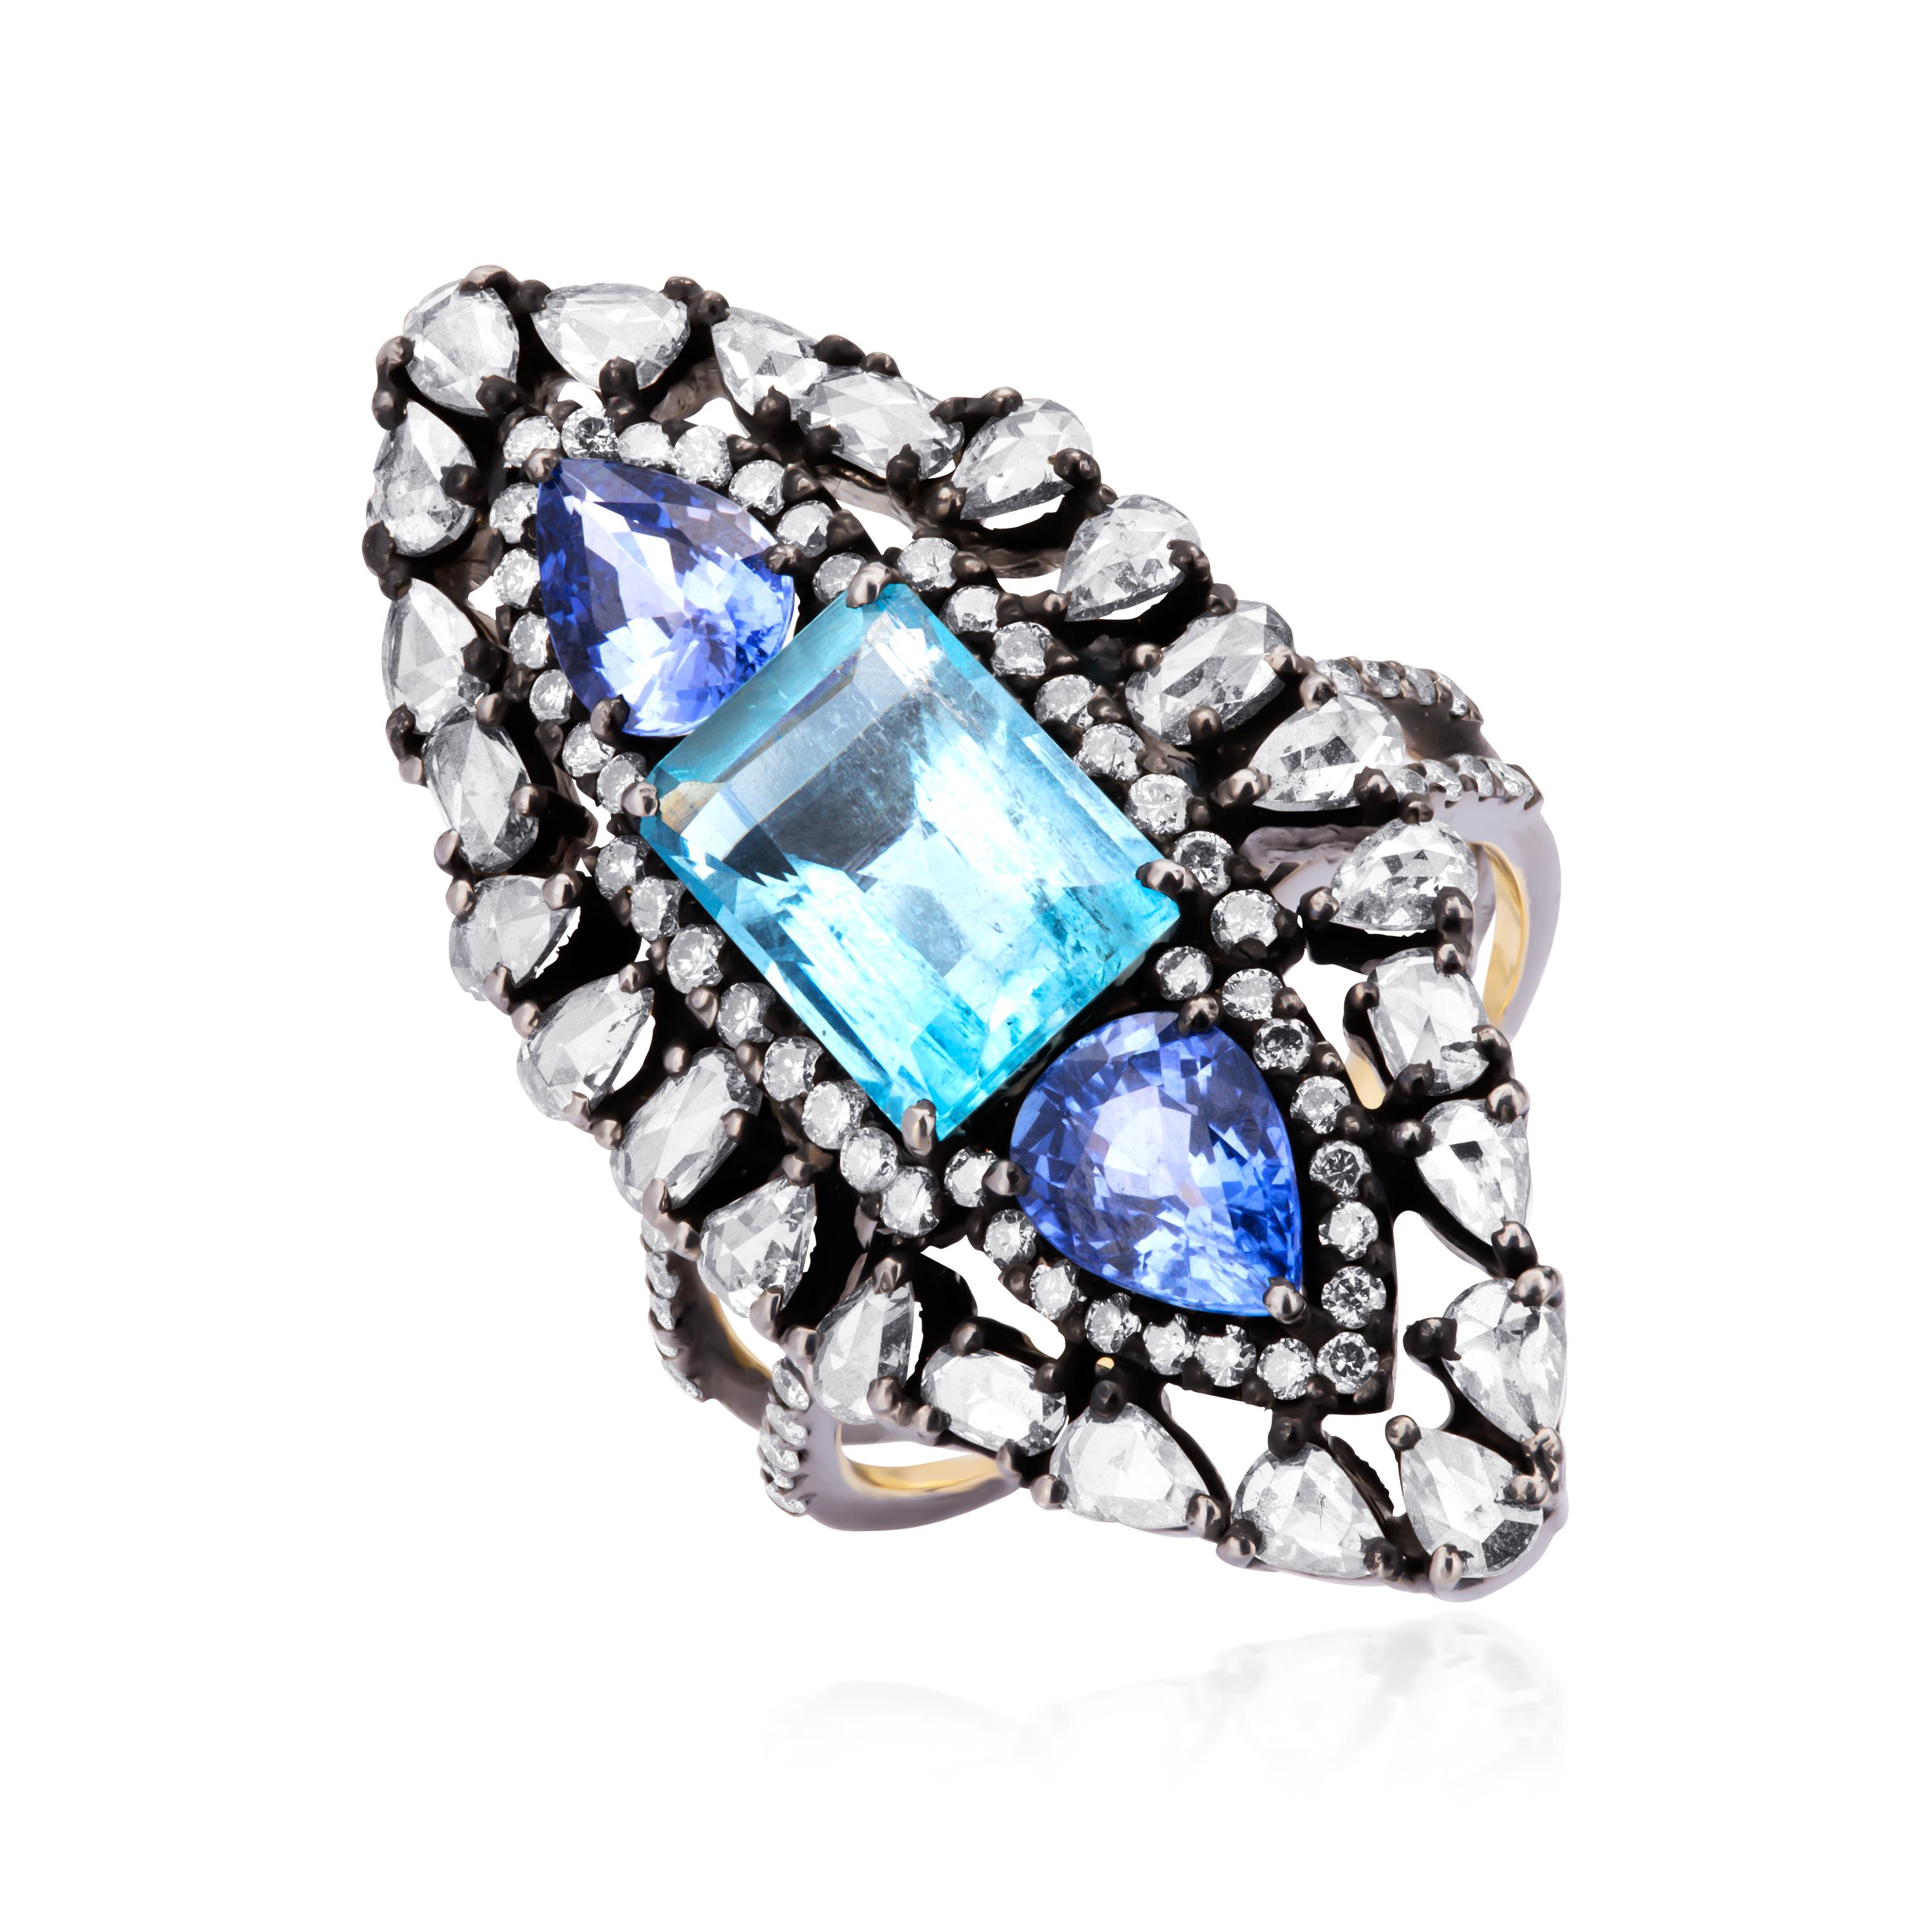 A gorgeous emerald cut aquamarine, weighing 2.6 Cts enhanced with two blue sapphires on each side sits in a sparkling marquise shaped frame of diamonds. The center design is stabilized with a split shank band adorned with more diamonds. Crafted in